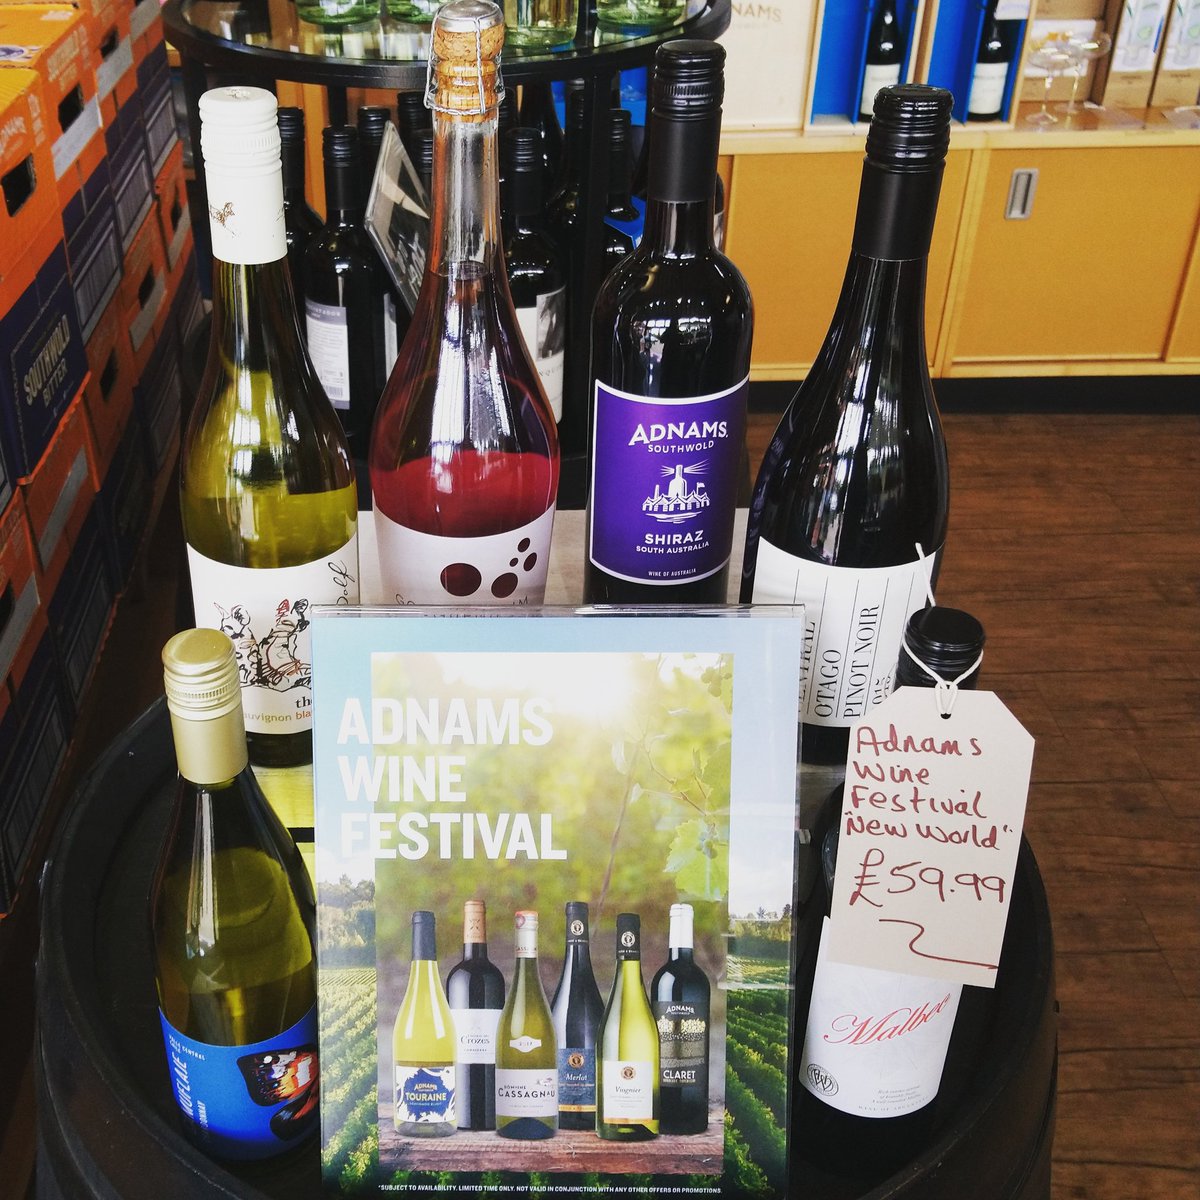 Our Adnams Wine Festival continues with a £59.99 New World Wine Case.  This case features red, white & sparkling highlights from around the world.

Offer this week only.

#adnams #winefestival #wine #lovewine #newworldwine #winecase #winesale